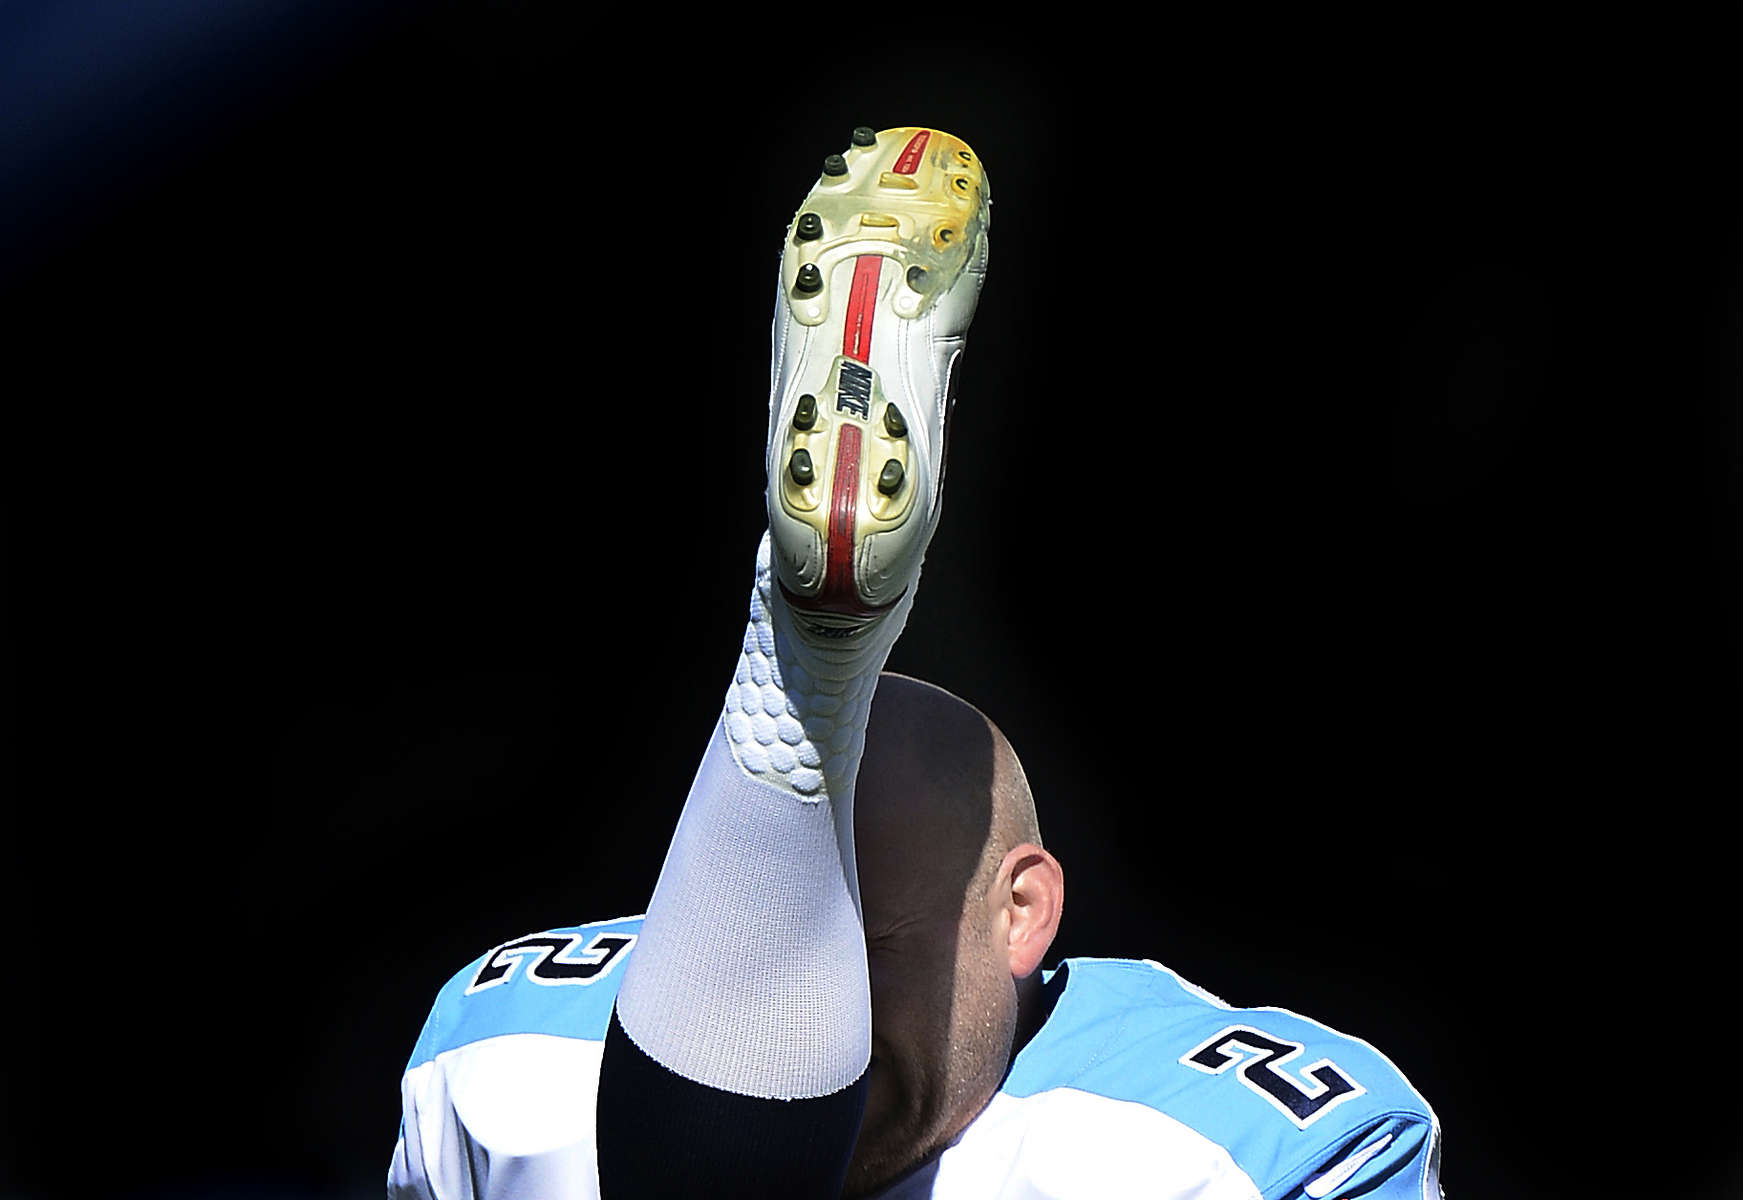 Tennessee Titans kicker Rob Bironas warms up before an NFL football game between the Titans and the San Diego Chargers on Sept. 22, 2013, in Nashville, Tenn. (AP Photo/ Mark Zaleski)